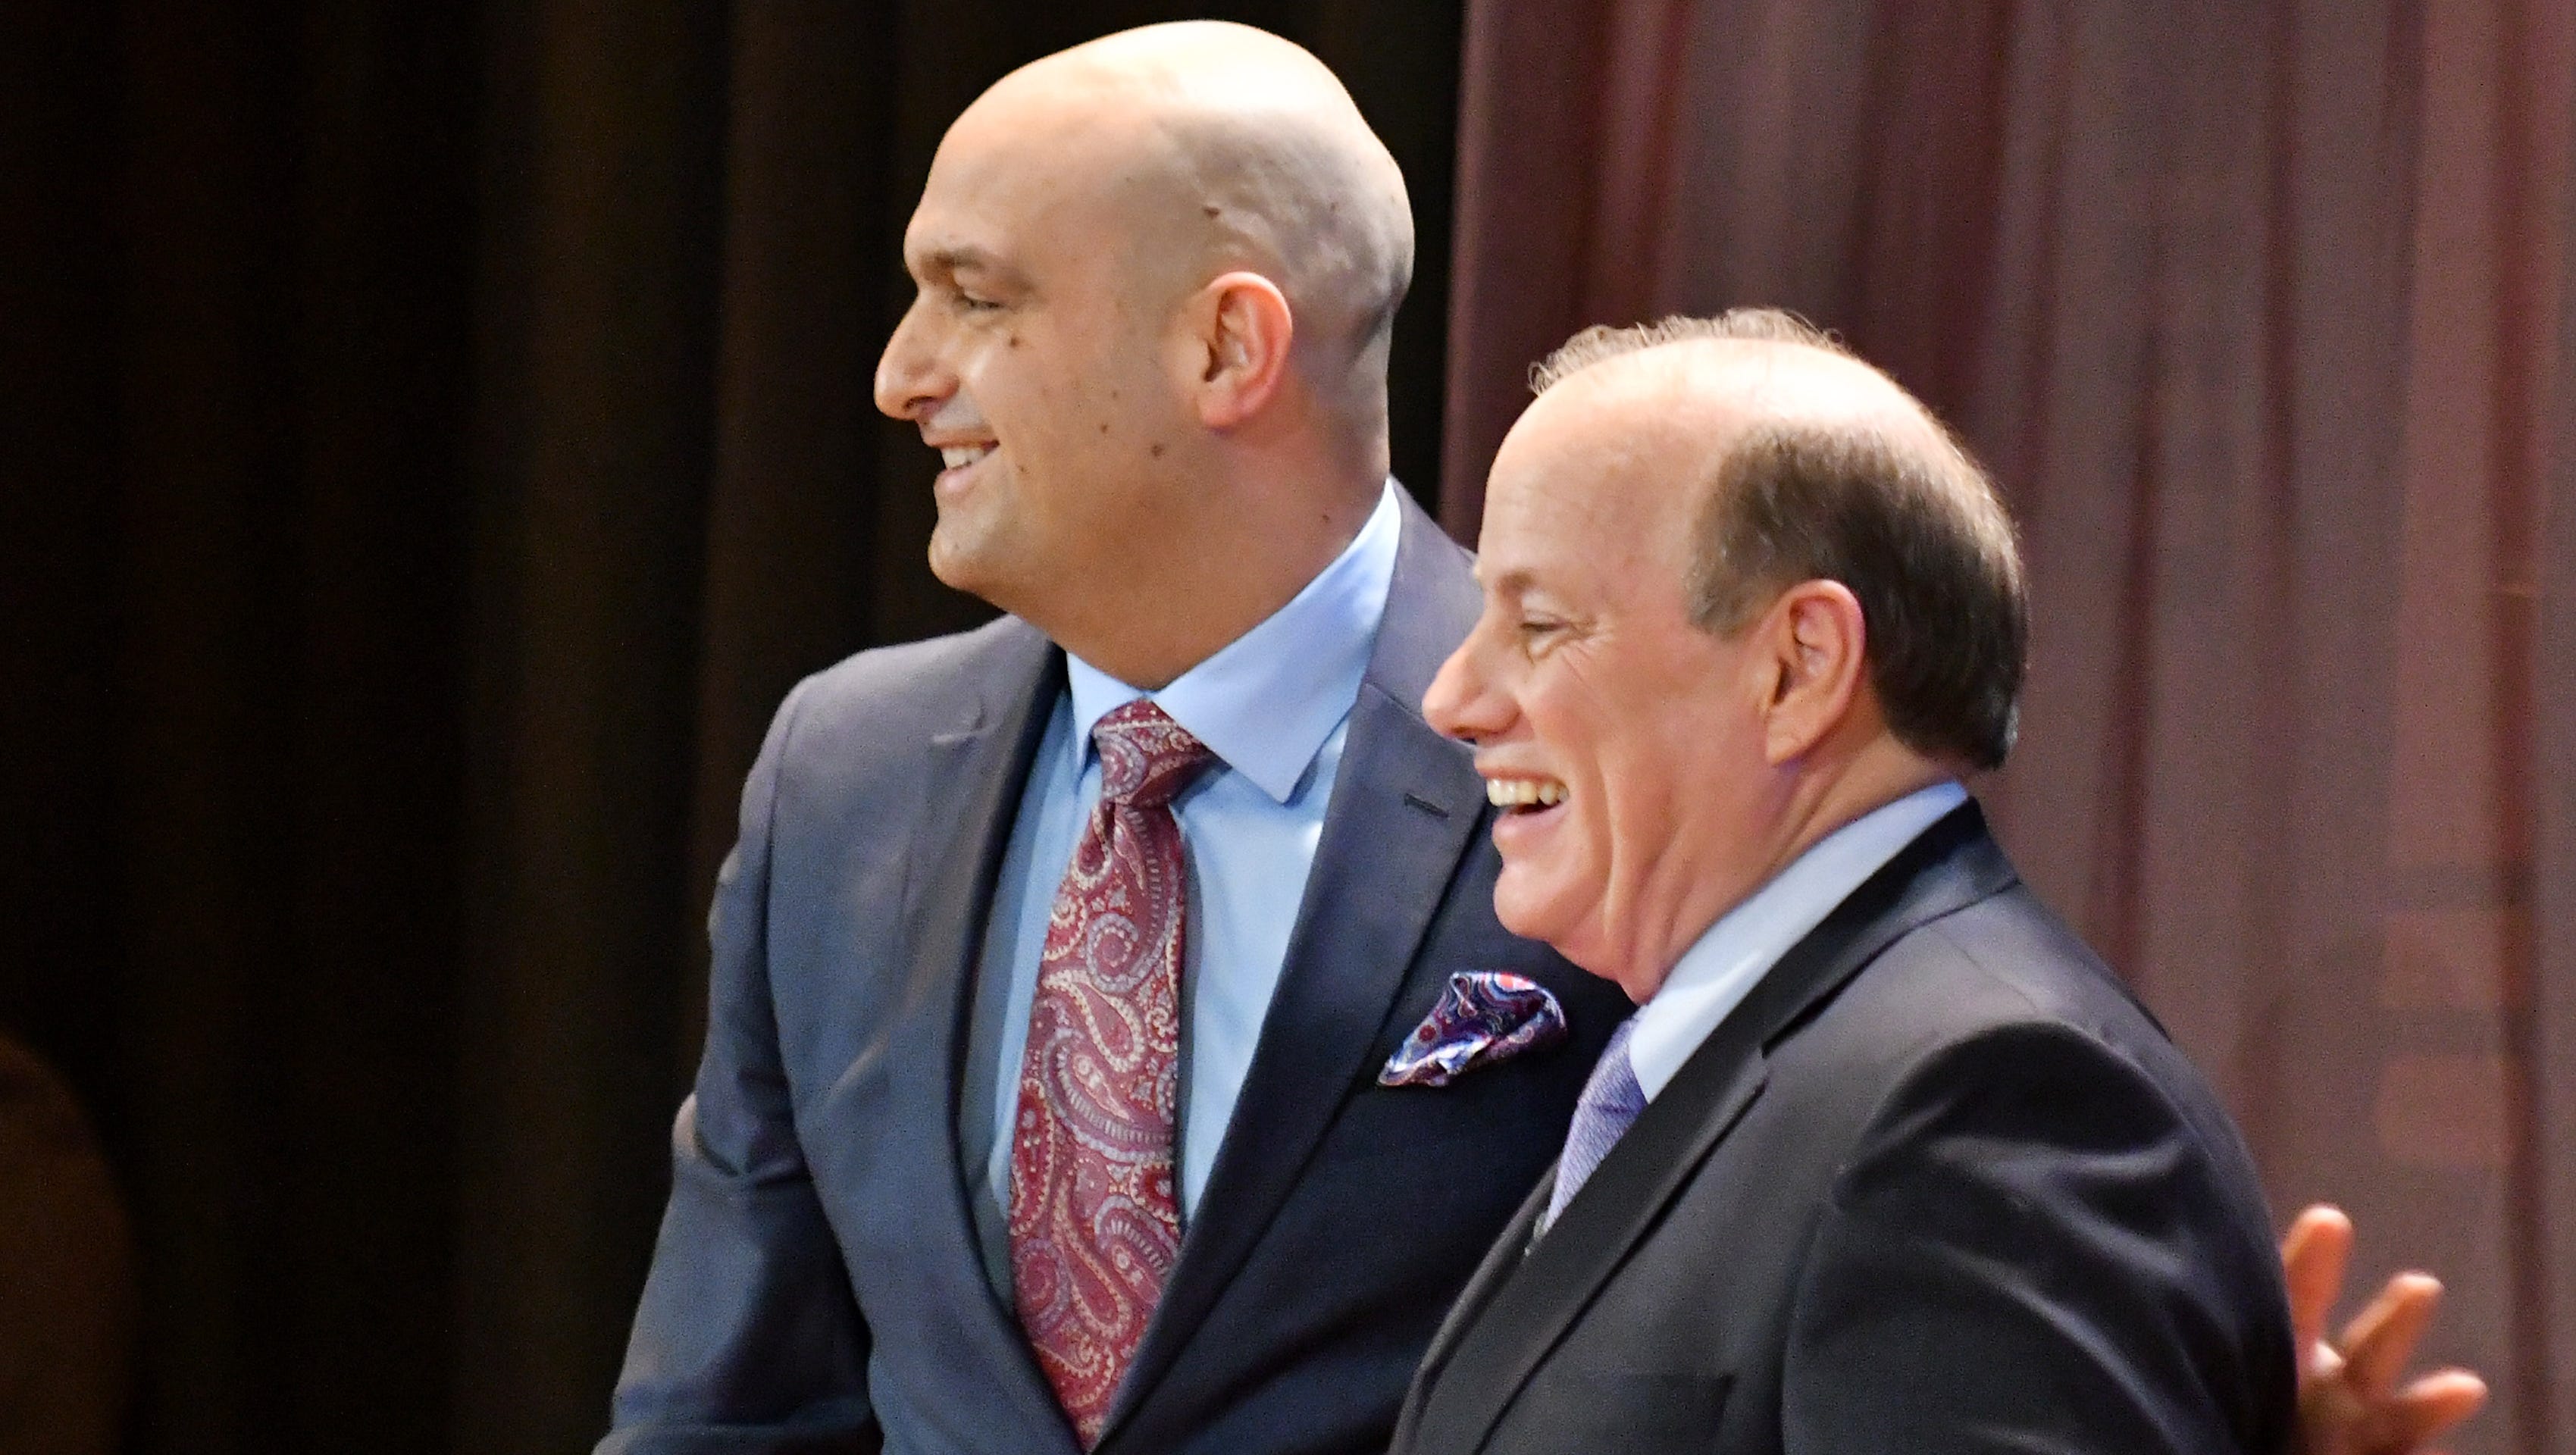 Detroit Public Schools Community District superintendent Dr. Nikolai Vitti, left, and Mayor Mike Duggan appeared together earlier this year after the mayor announced the bus loop during his annual speech.